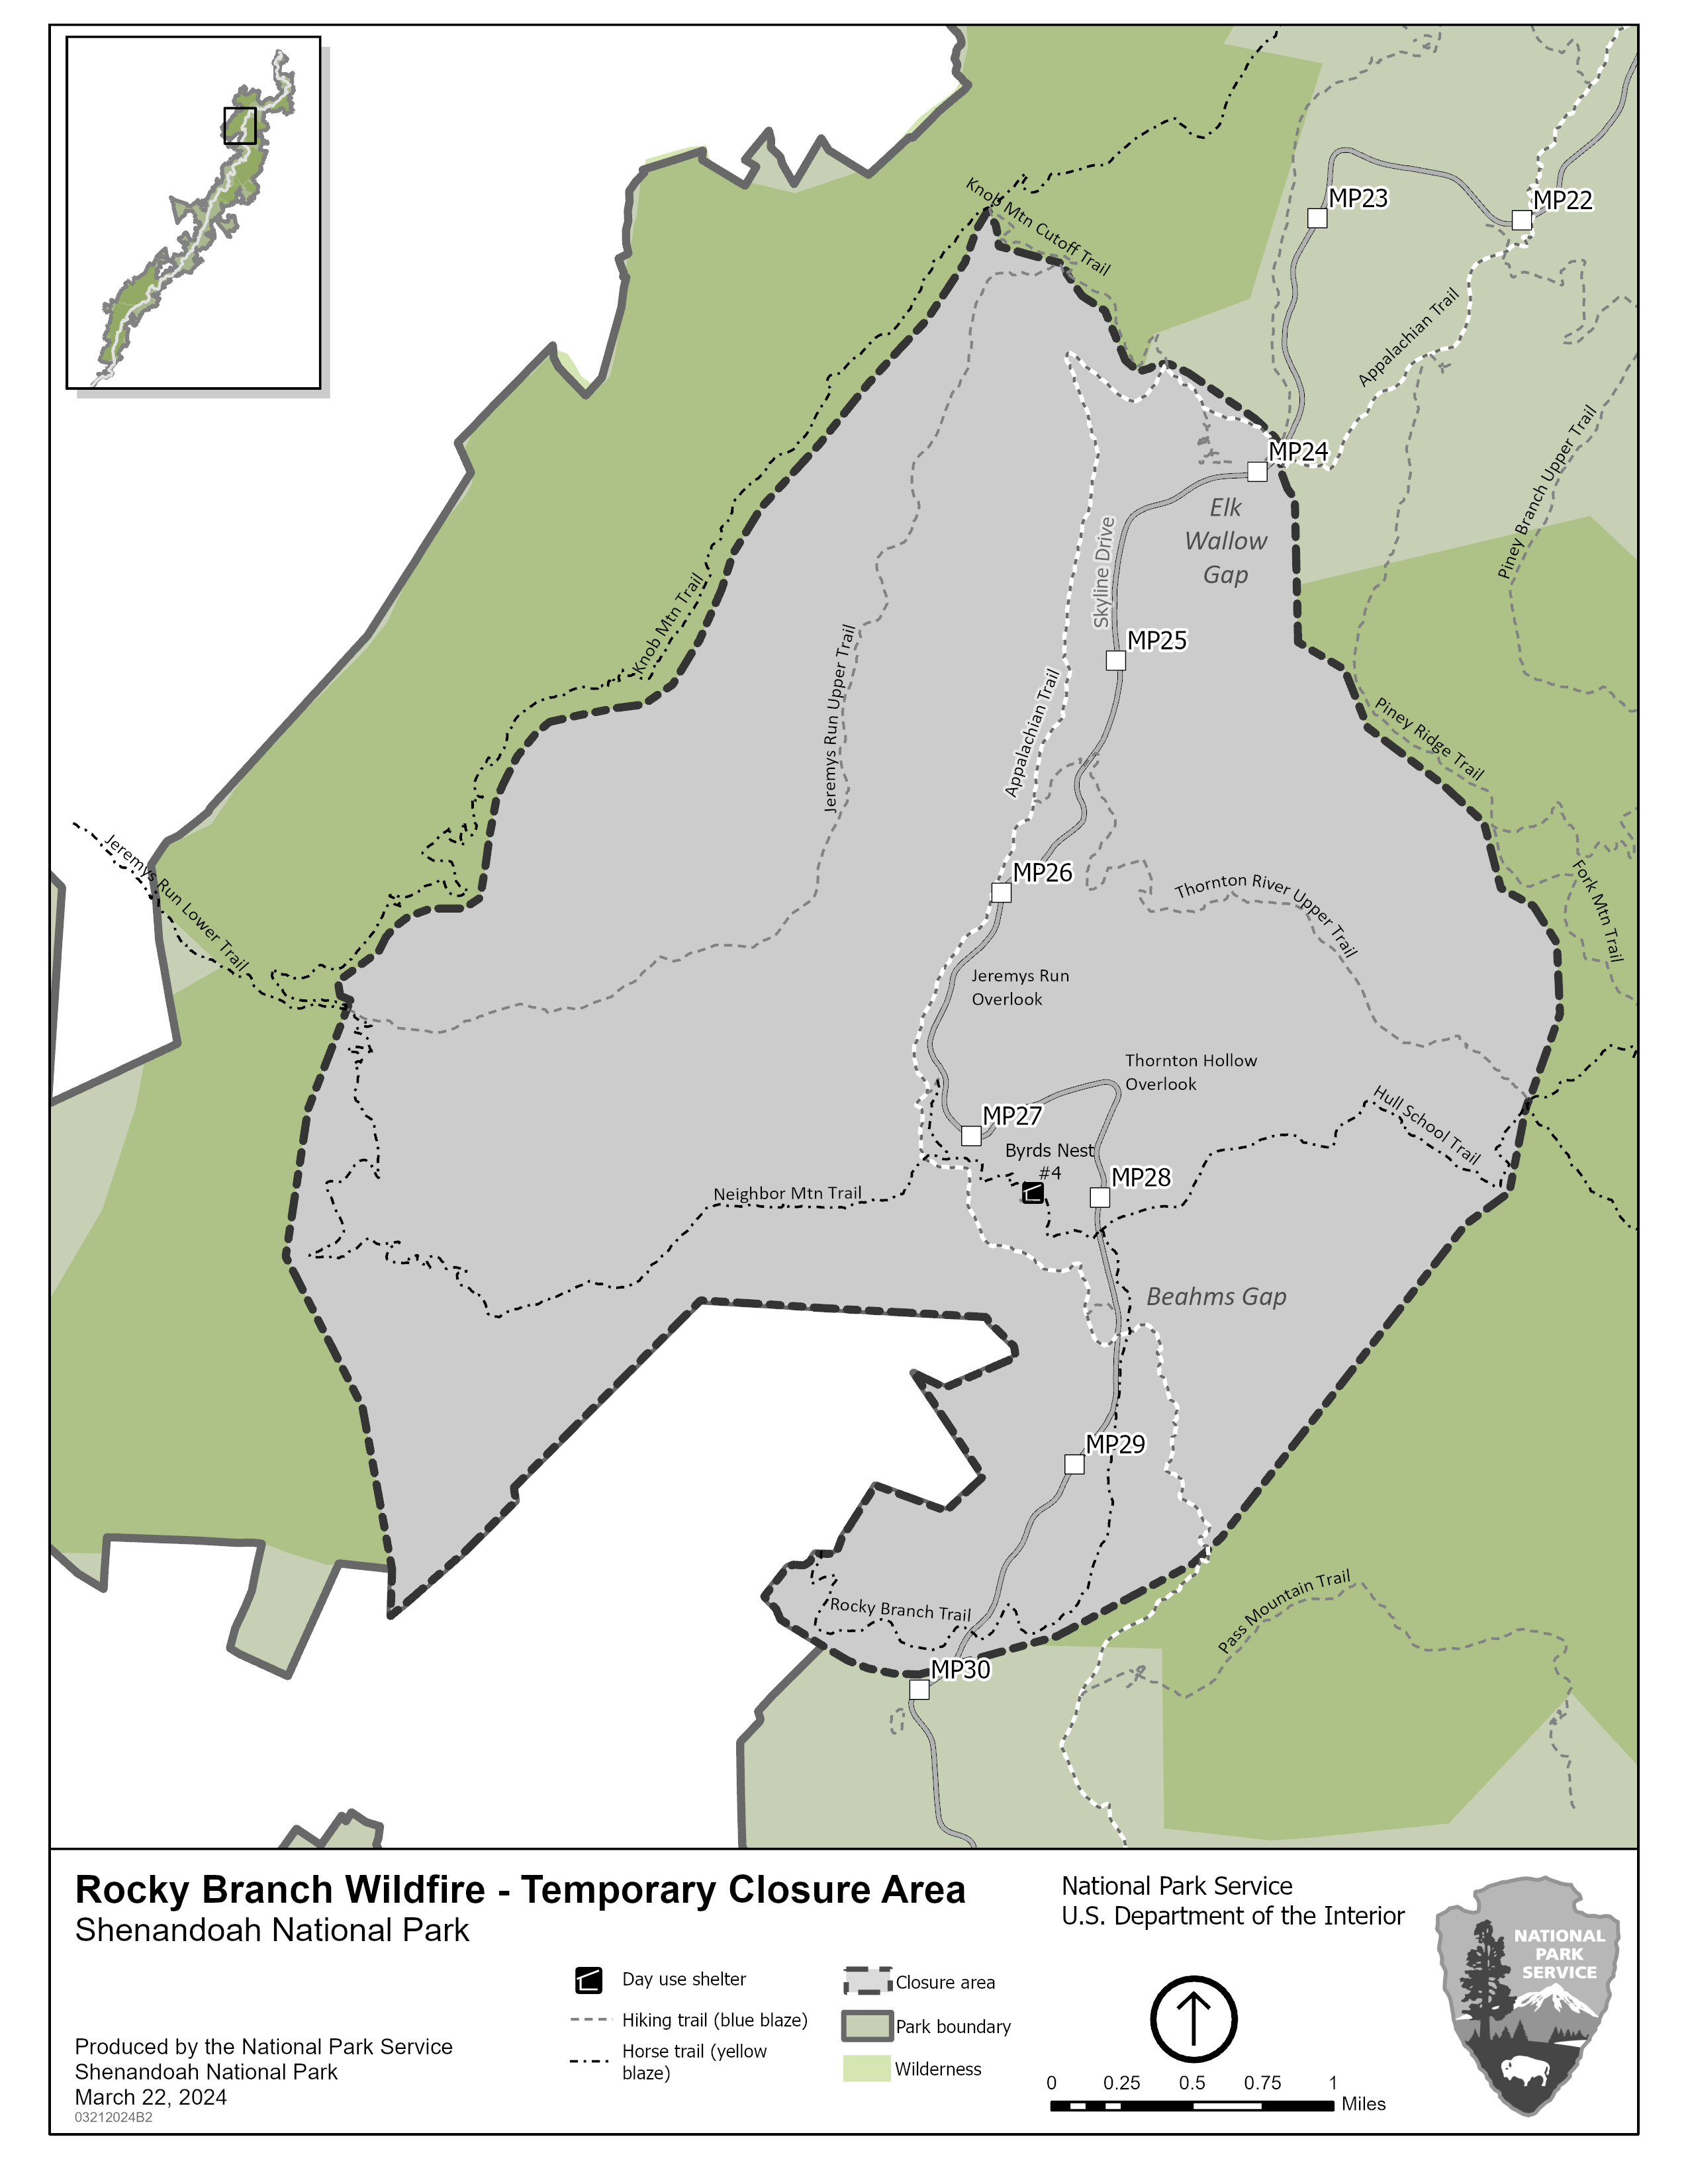 Map of closures for Shenandoah National Park. Green areas indicate open areas and grey indicate closed.